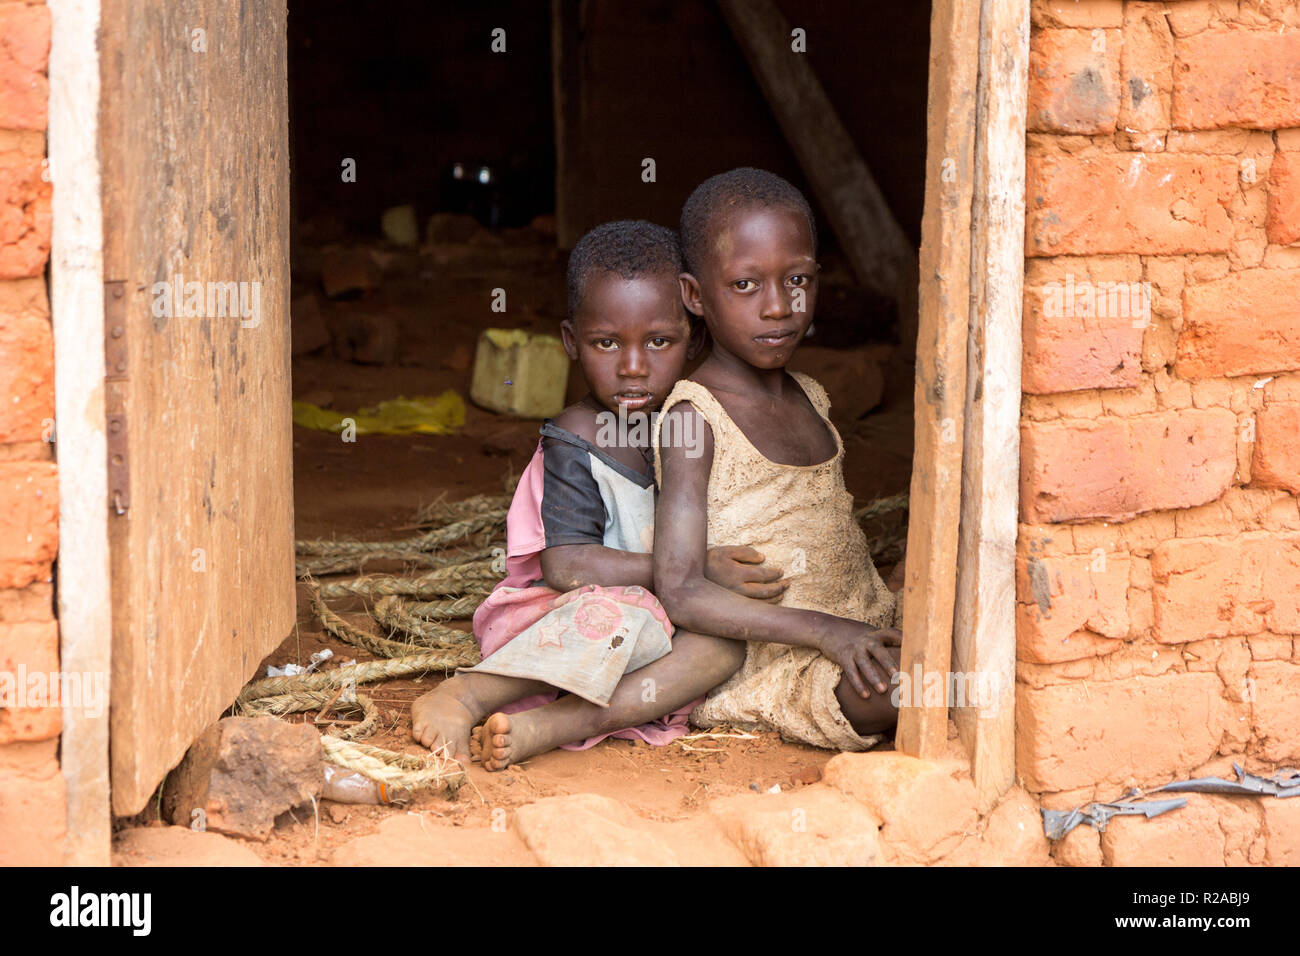 Two Ugandan children in ragged clothes sitting in an embrace on a dirt floor at the doorstep of a house. Stock Photo